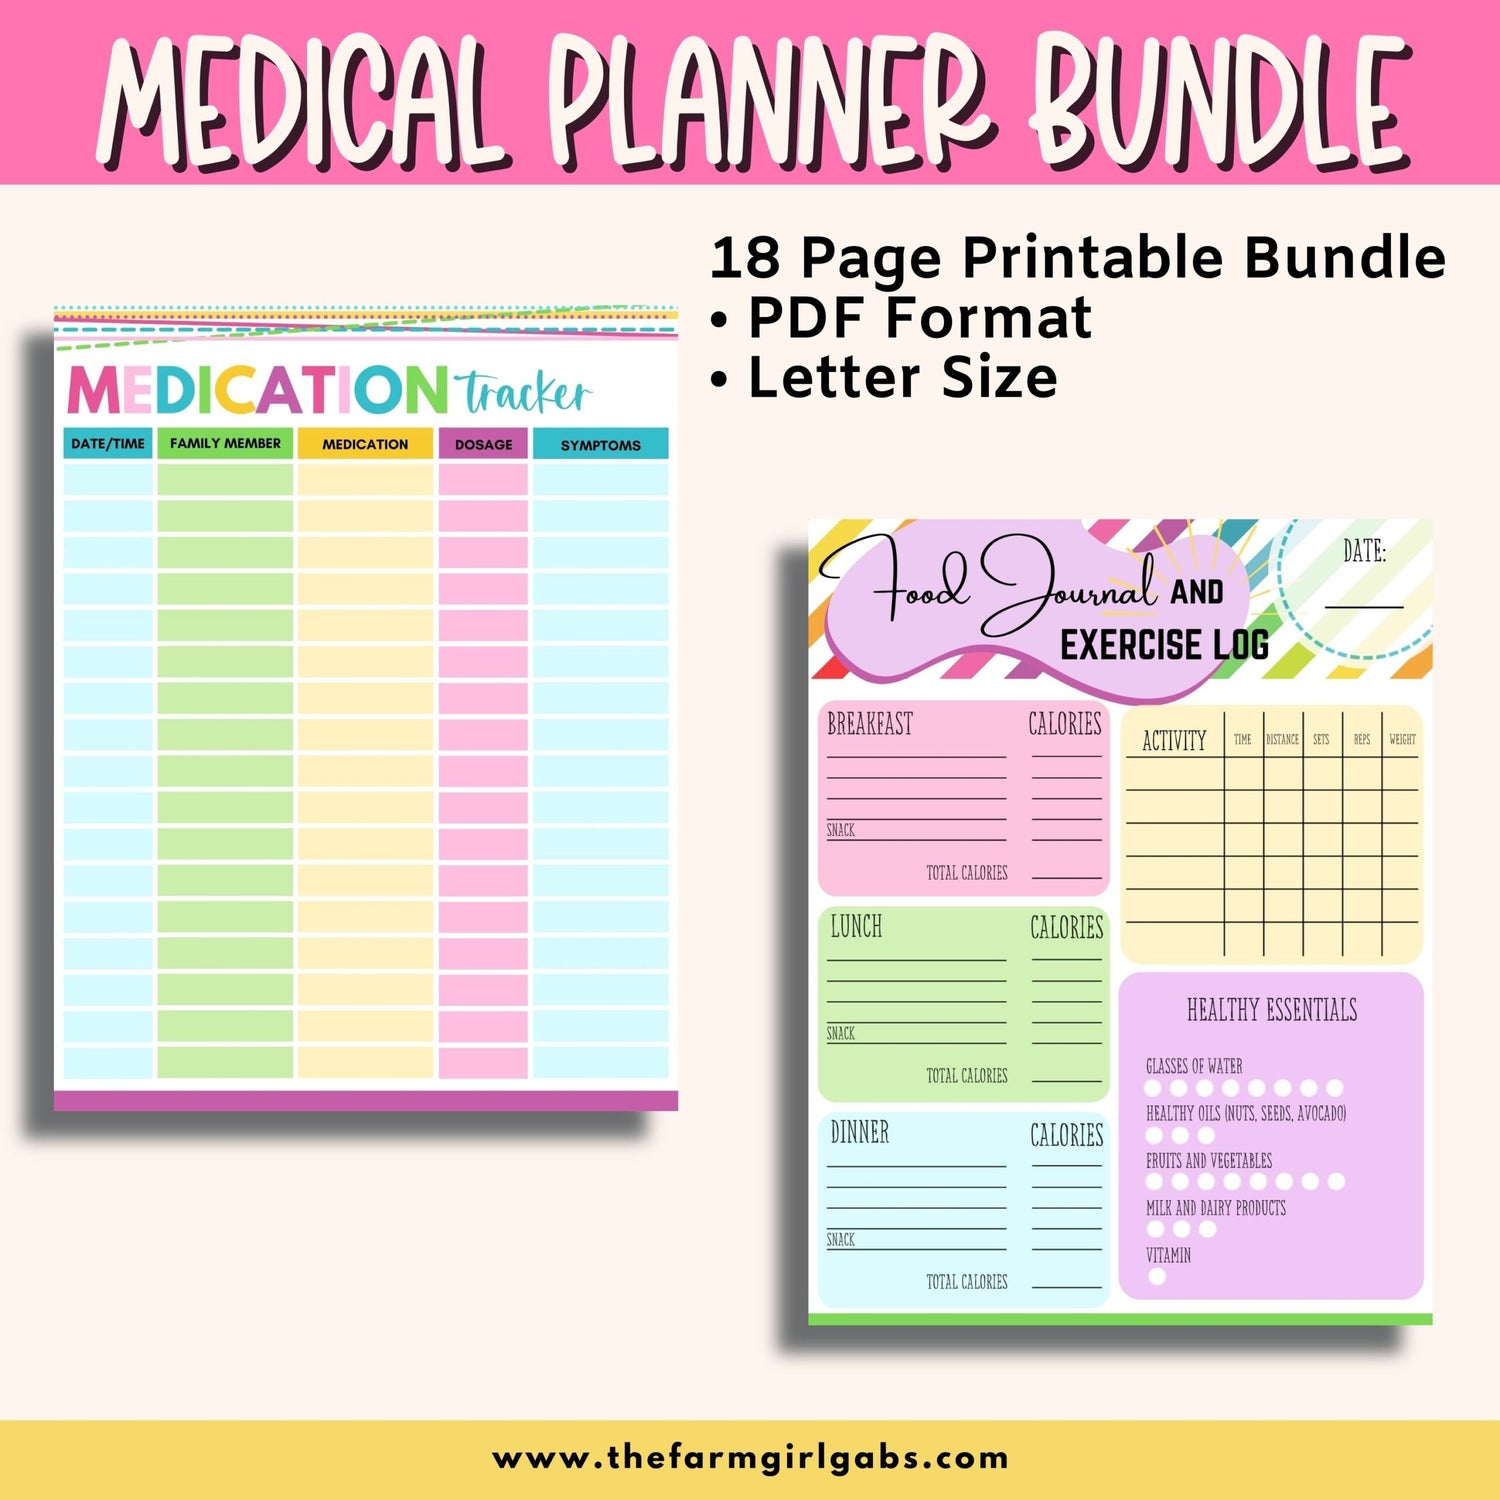 This letter-size binder will help you keep your family medical information in one place. This family medical planner will help you stay organized.